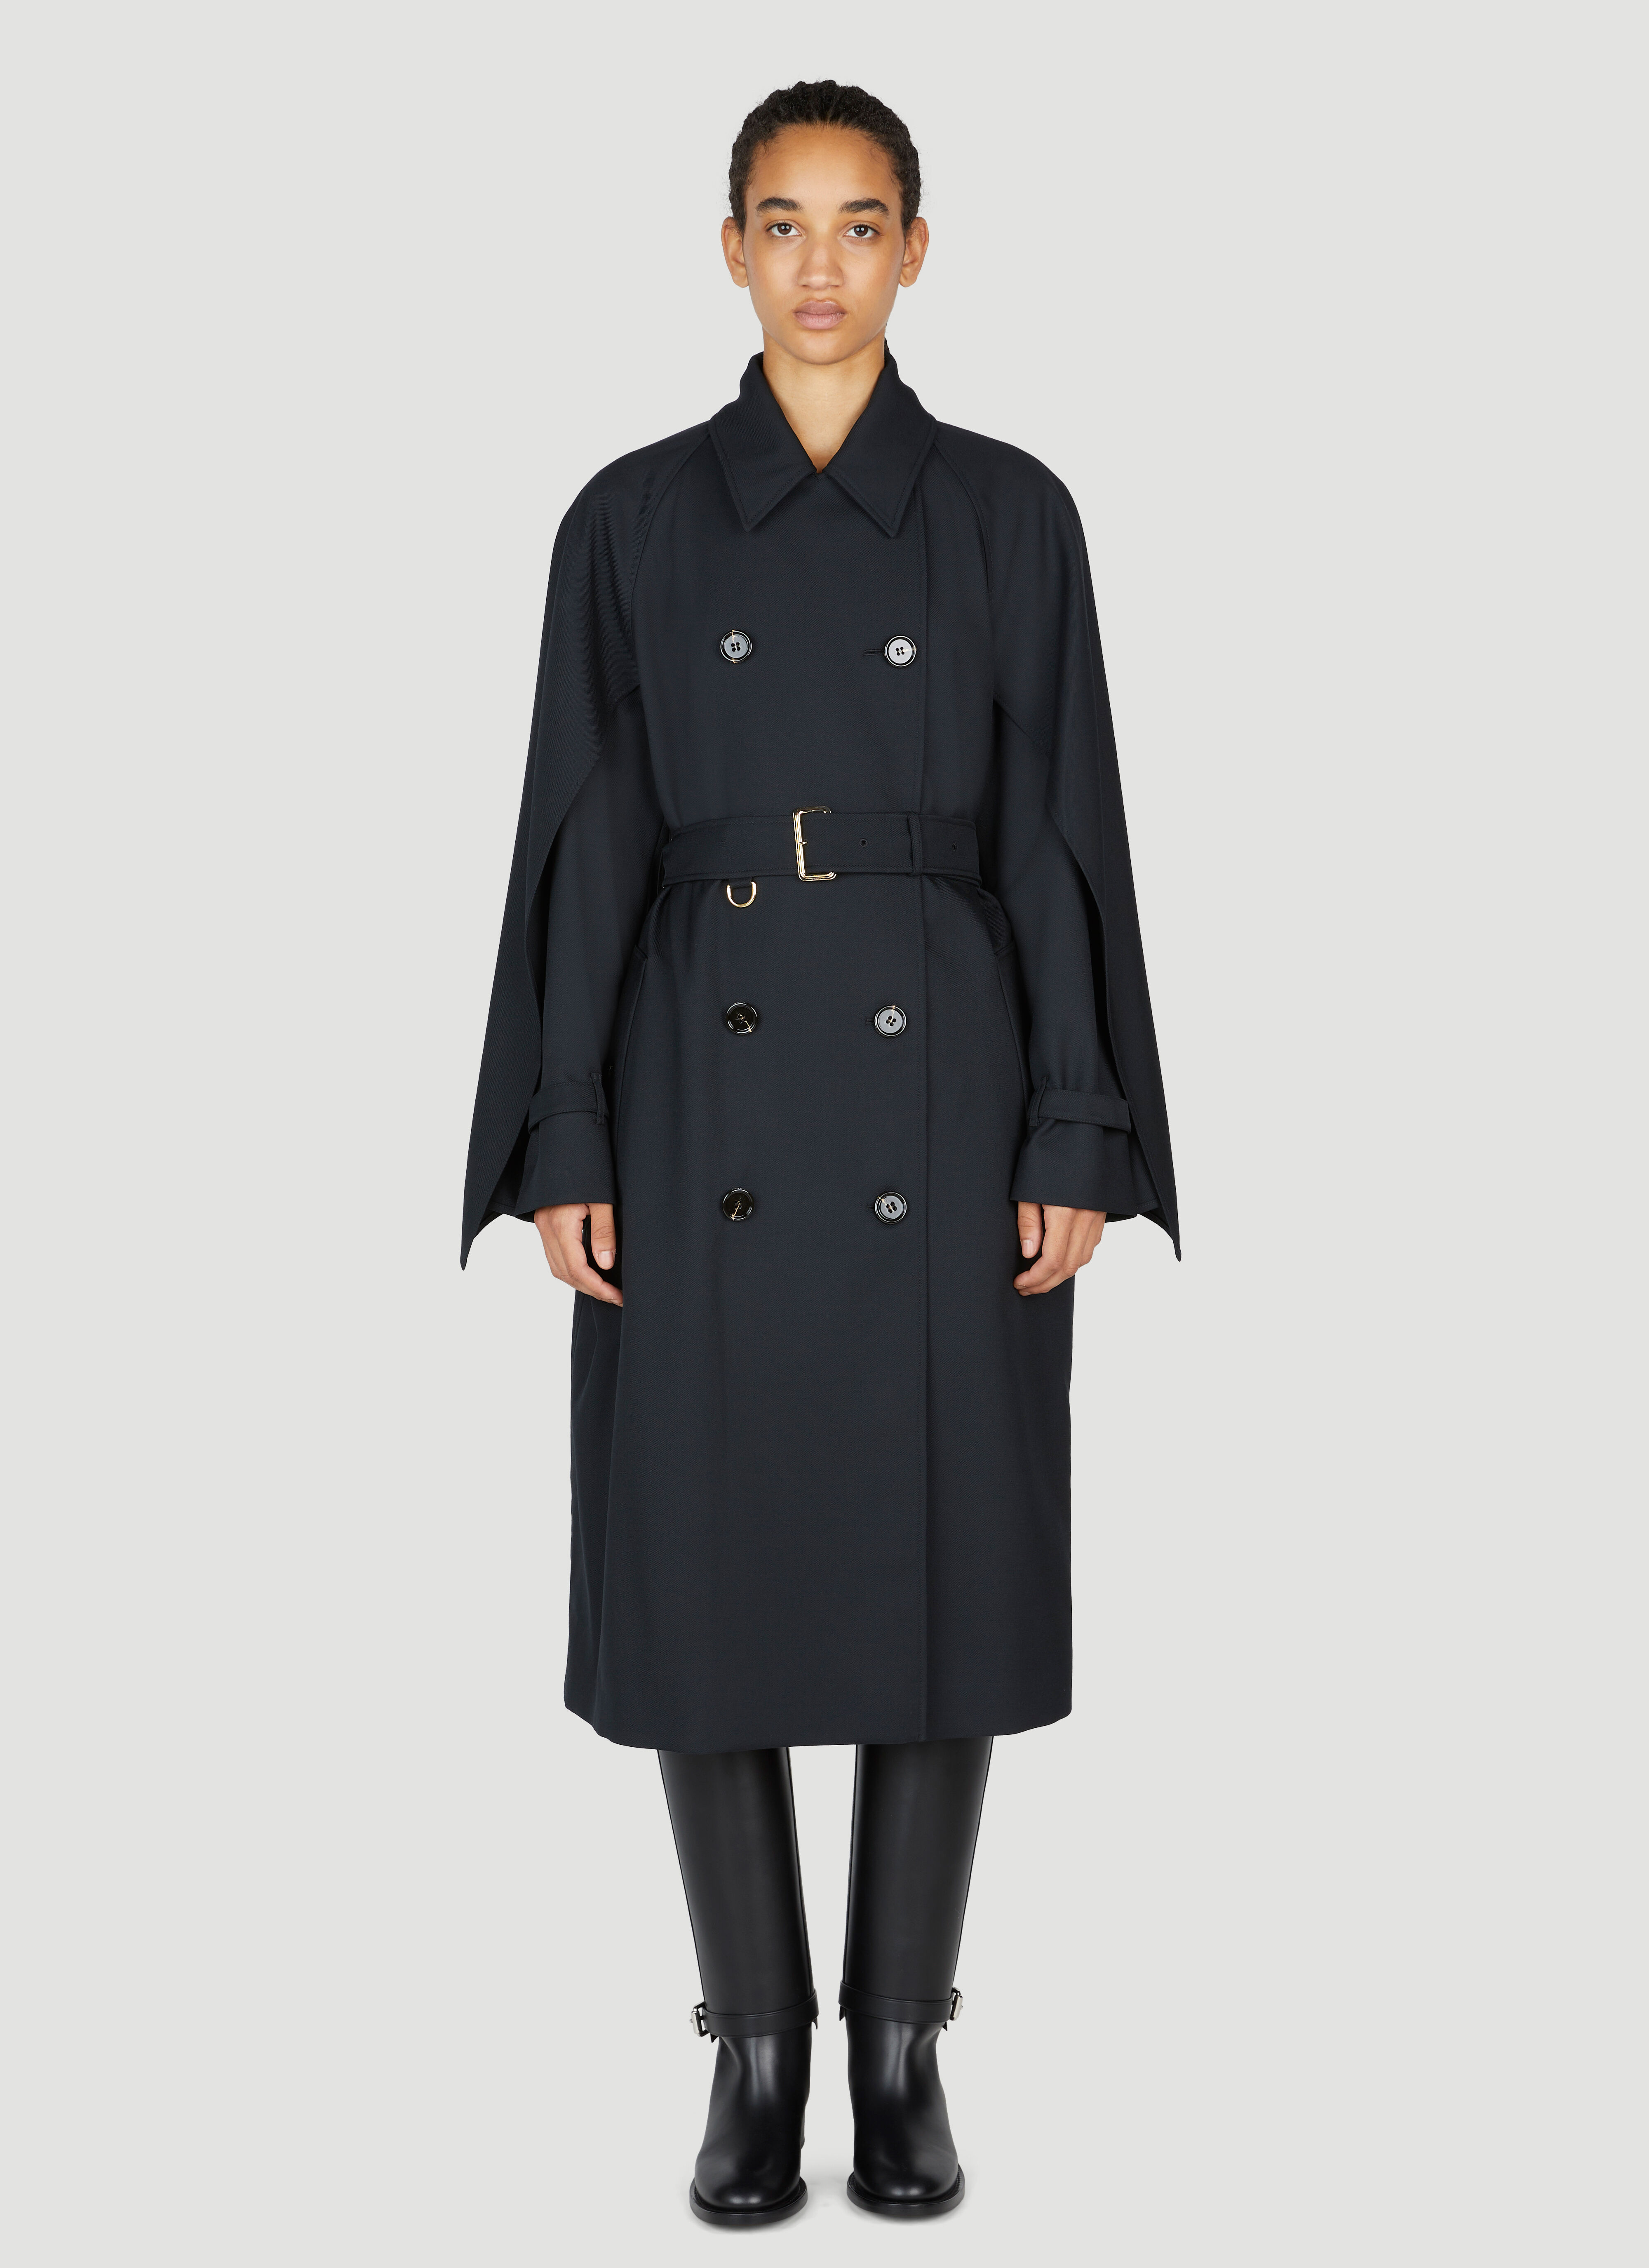 Burberry Cotness Double-Breasted Trench Coat Brown bur0253100